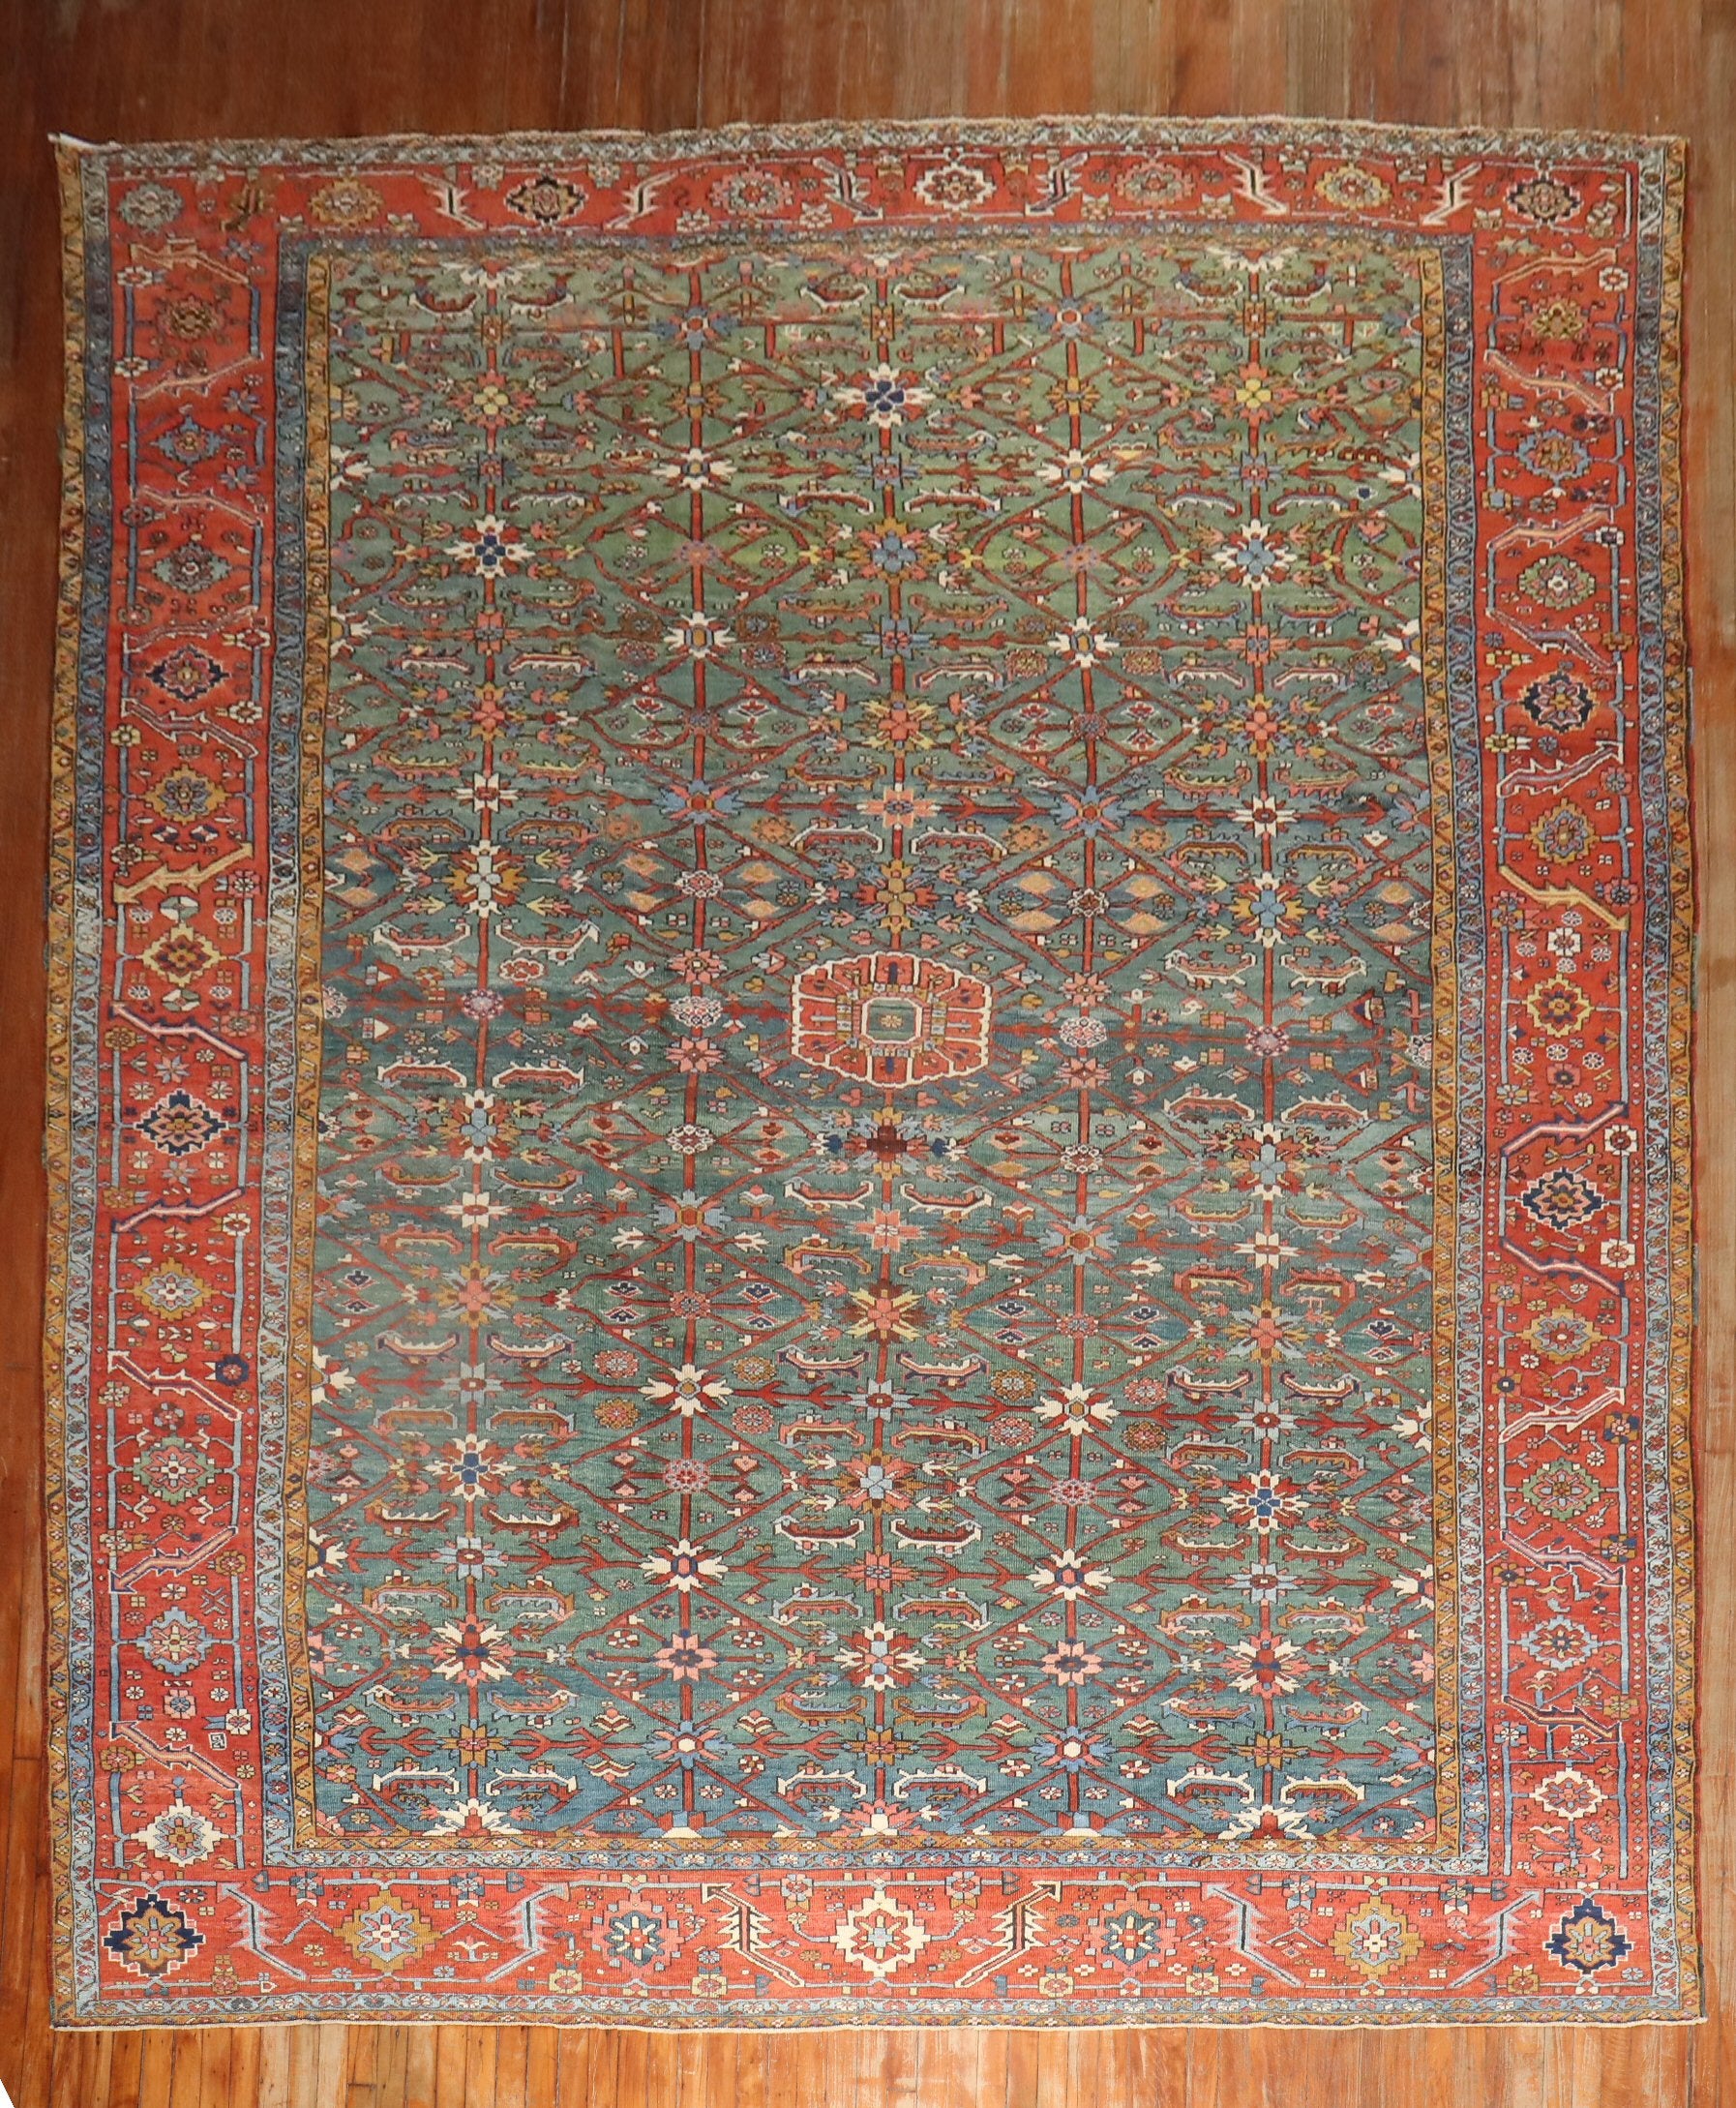 Large room size 1st quarter of the 20th century Persian heriz rug featuring a breathtaking emerald green field colro

Measures: 1011